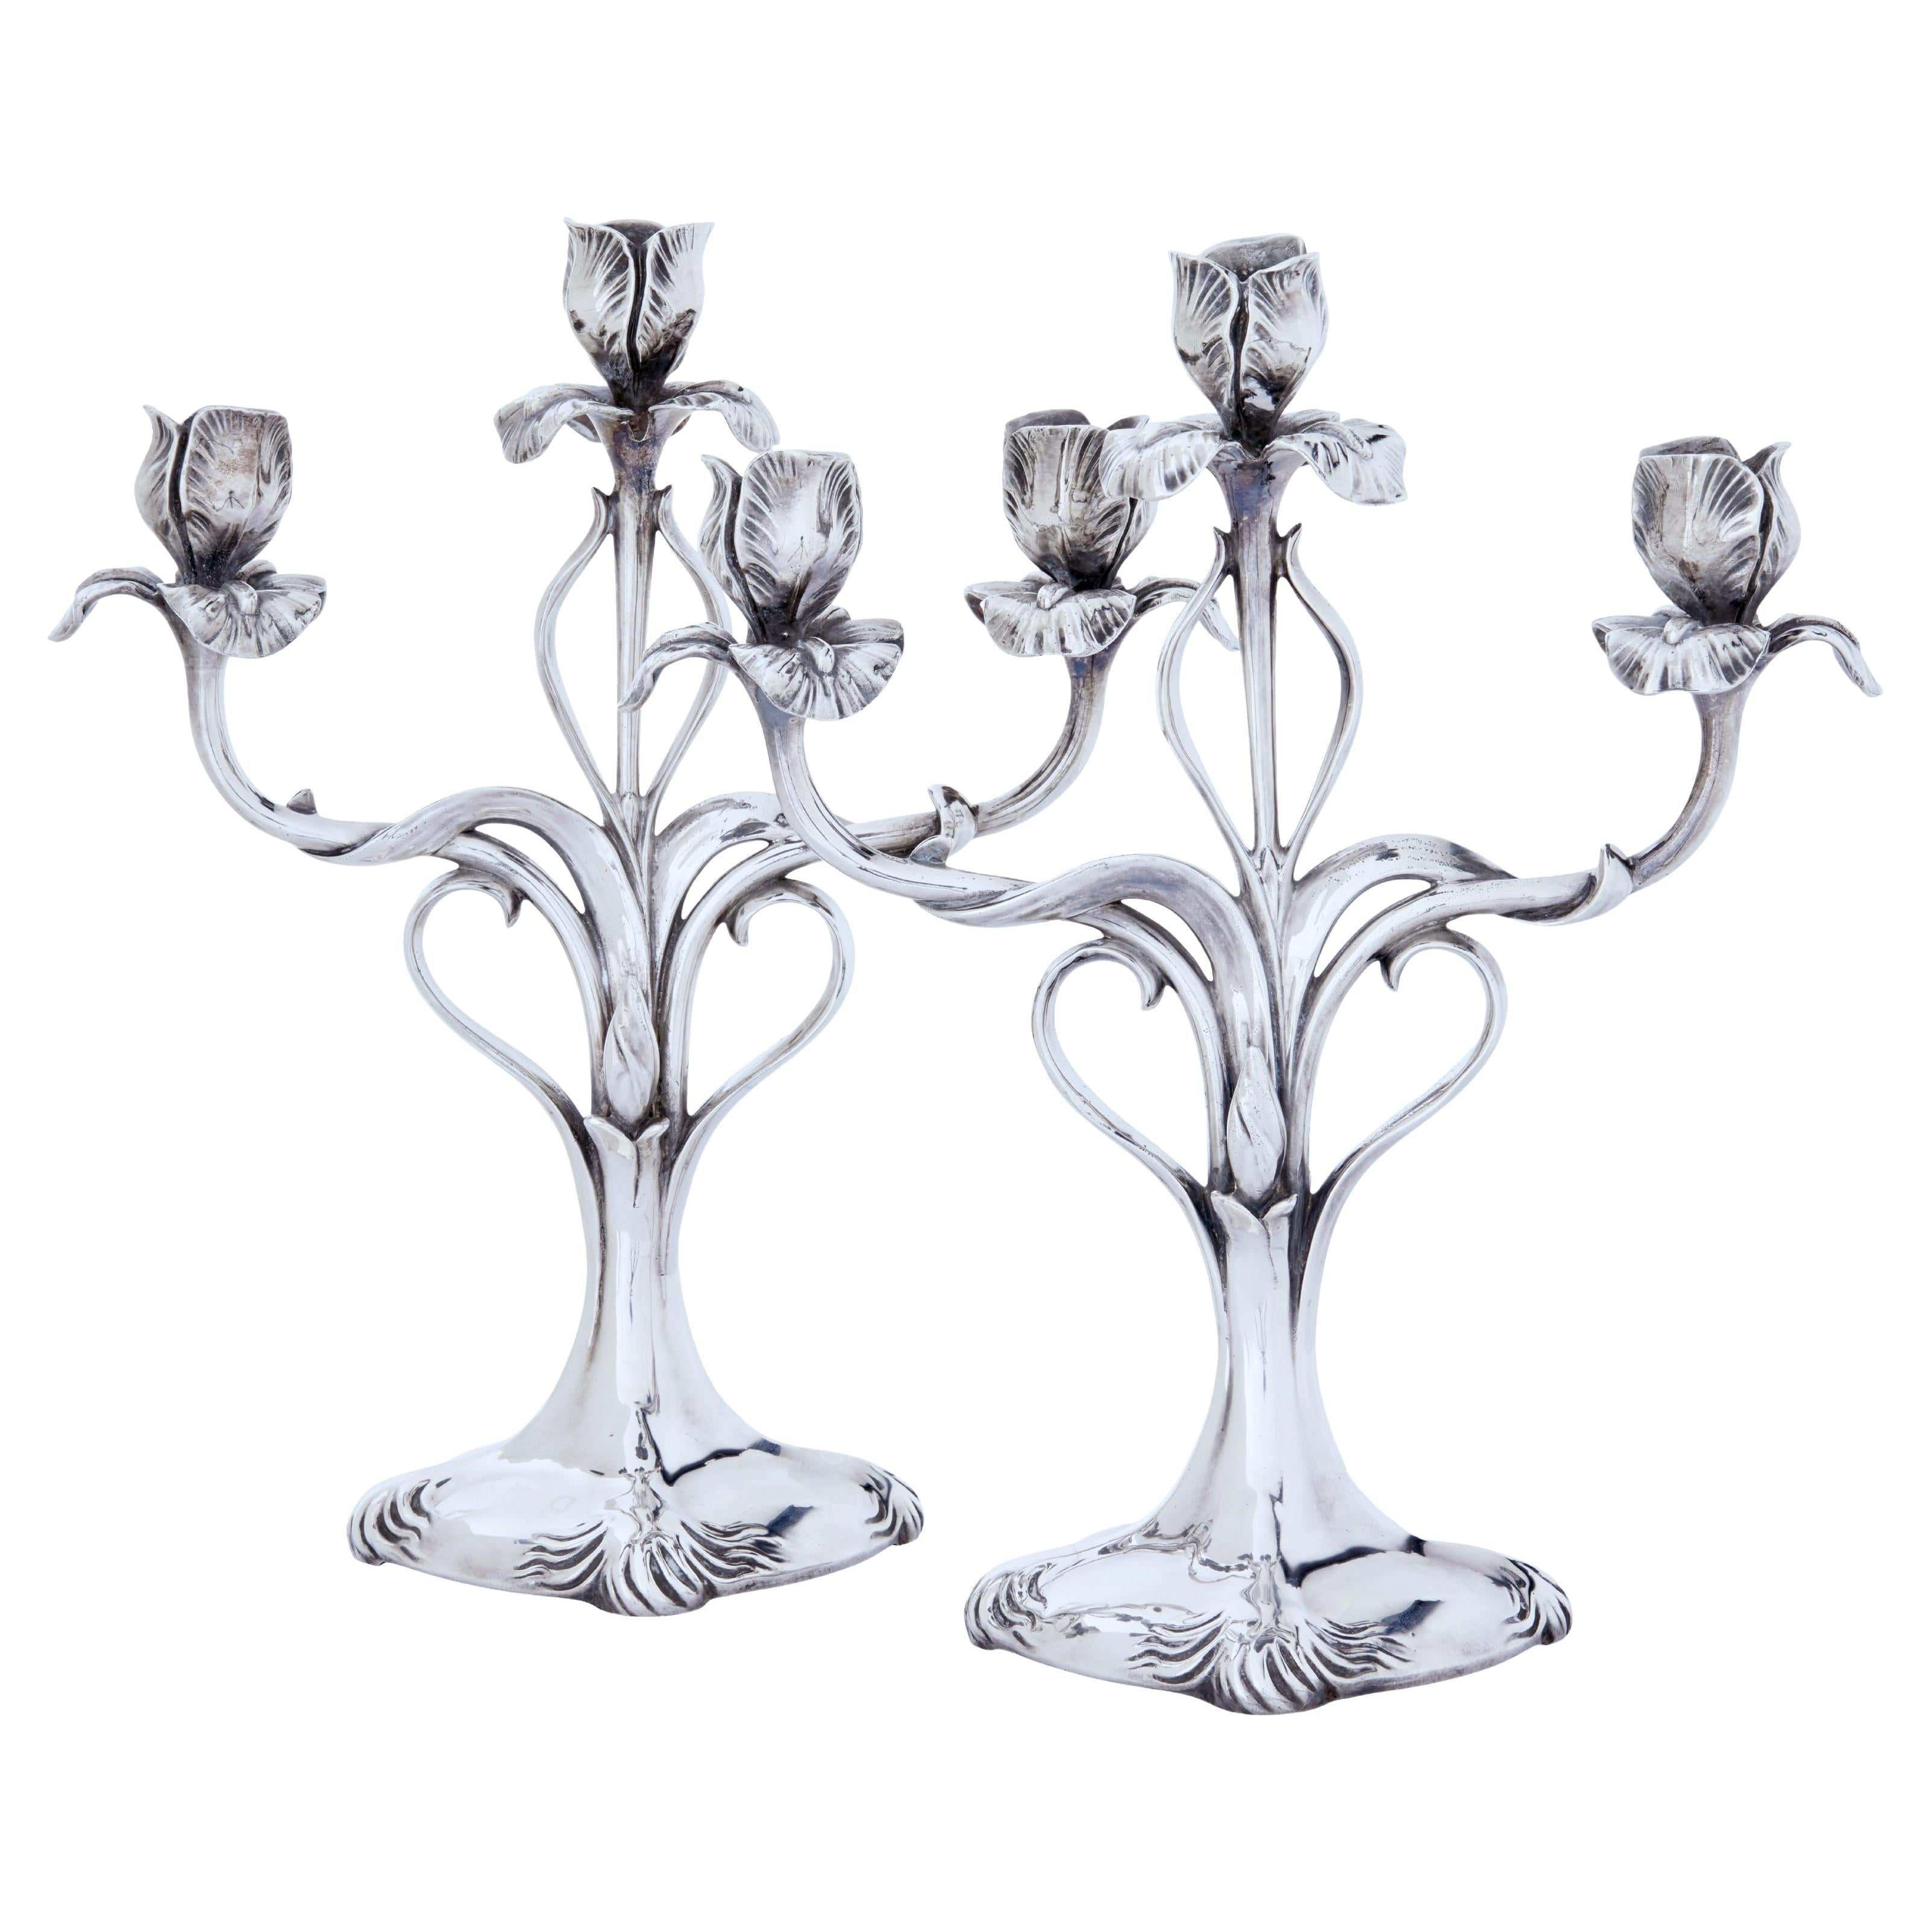 Pair of Silver Plate Candlesticks by Christofle